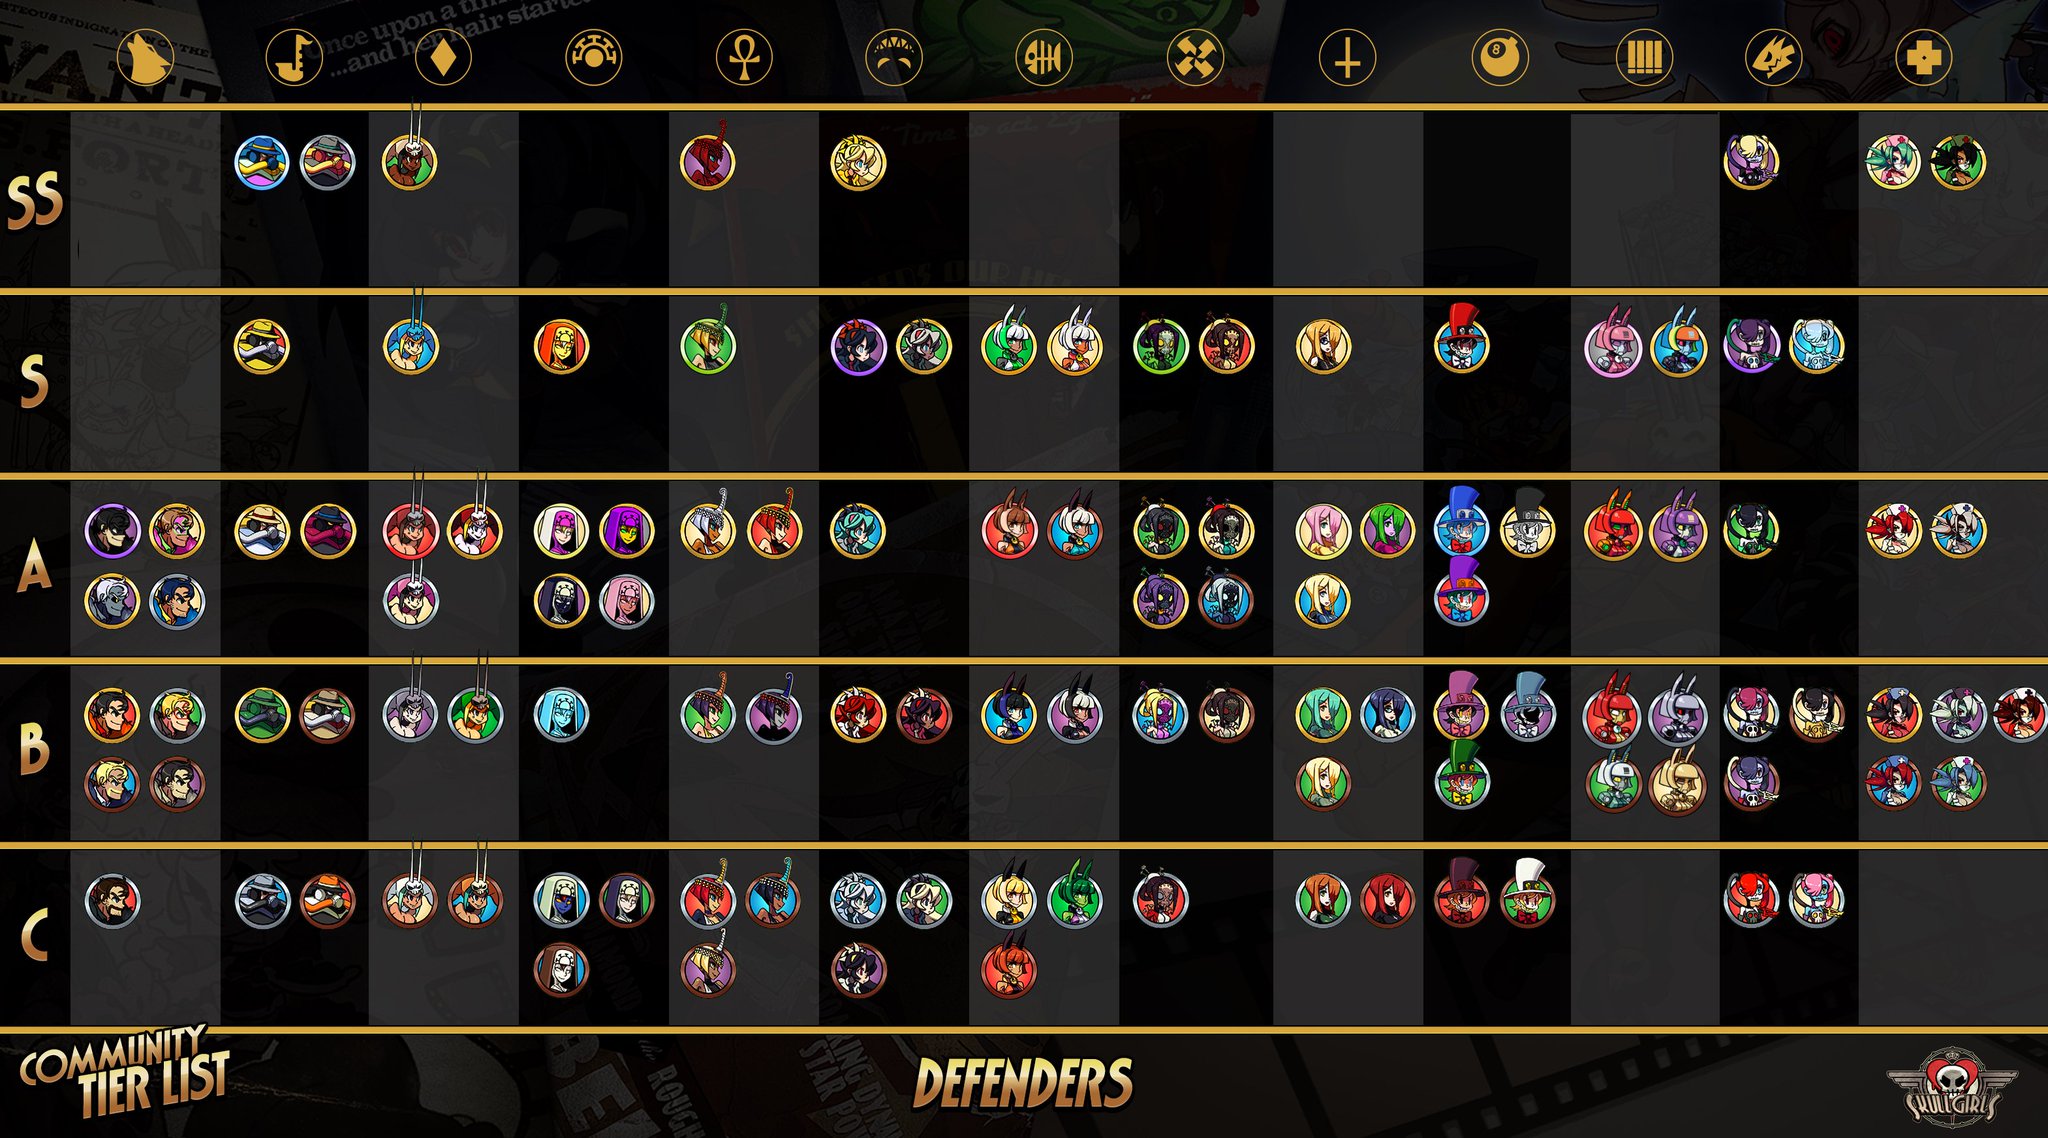 “The Official Community Tier List has been updated with Robo-Fortune Fighte...